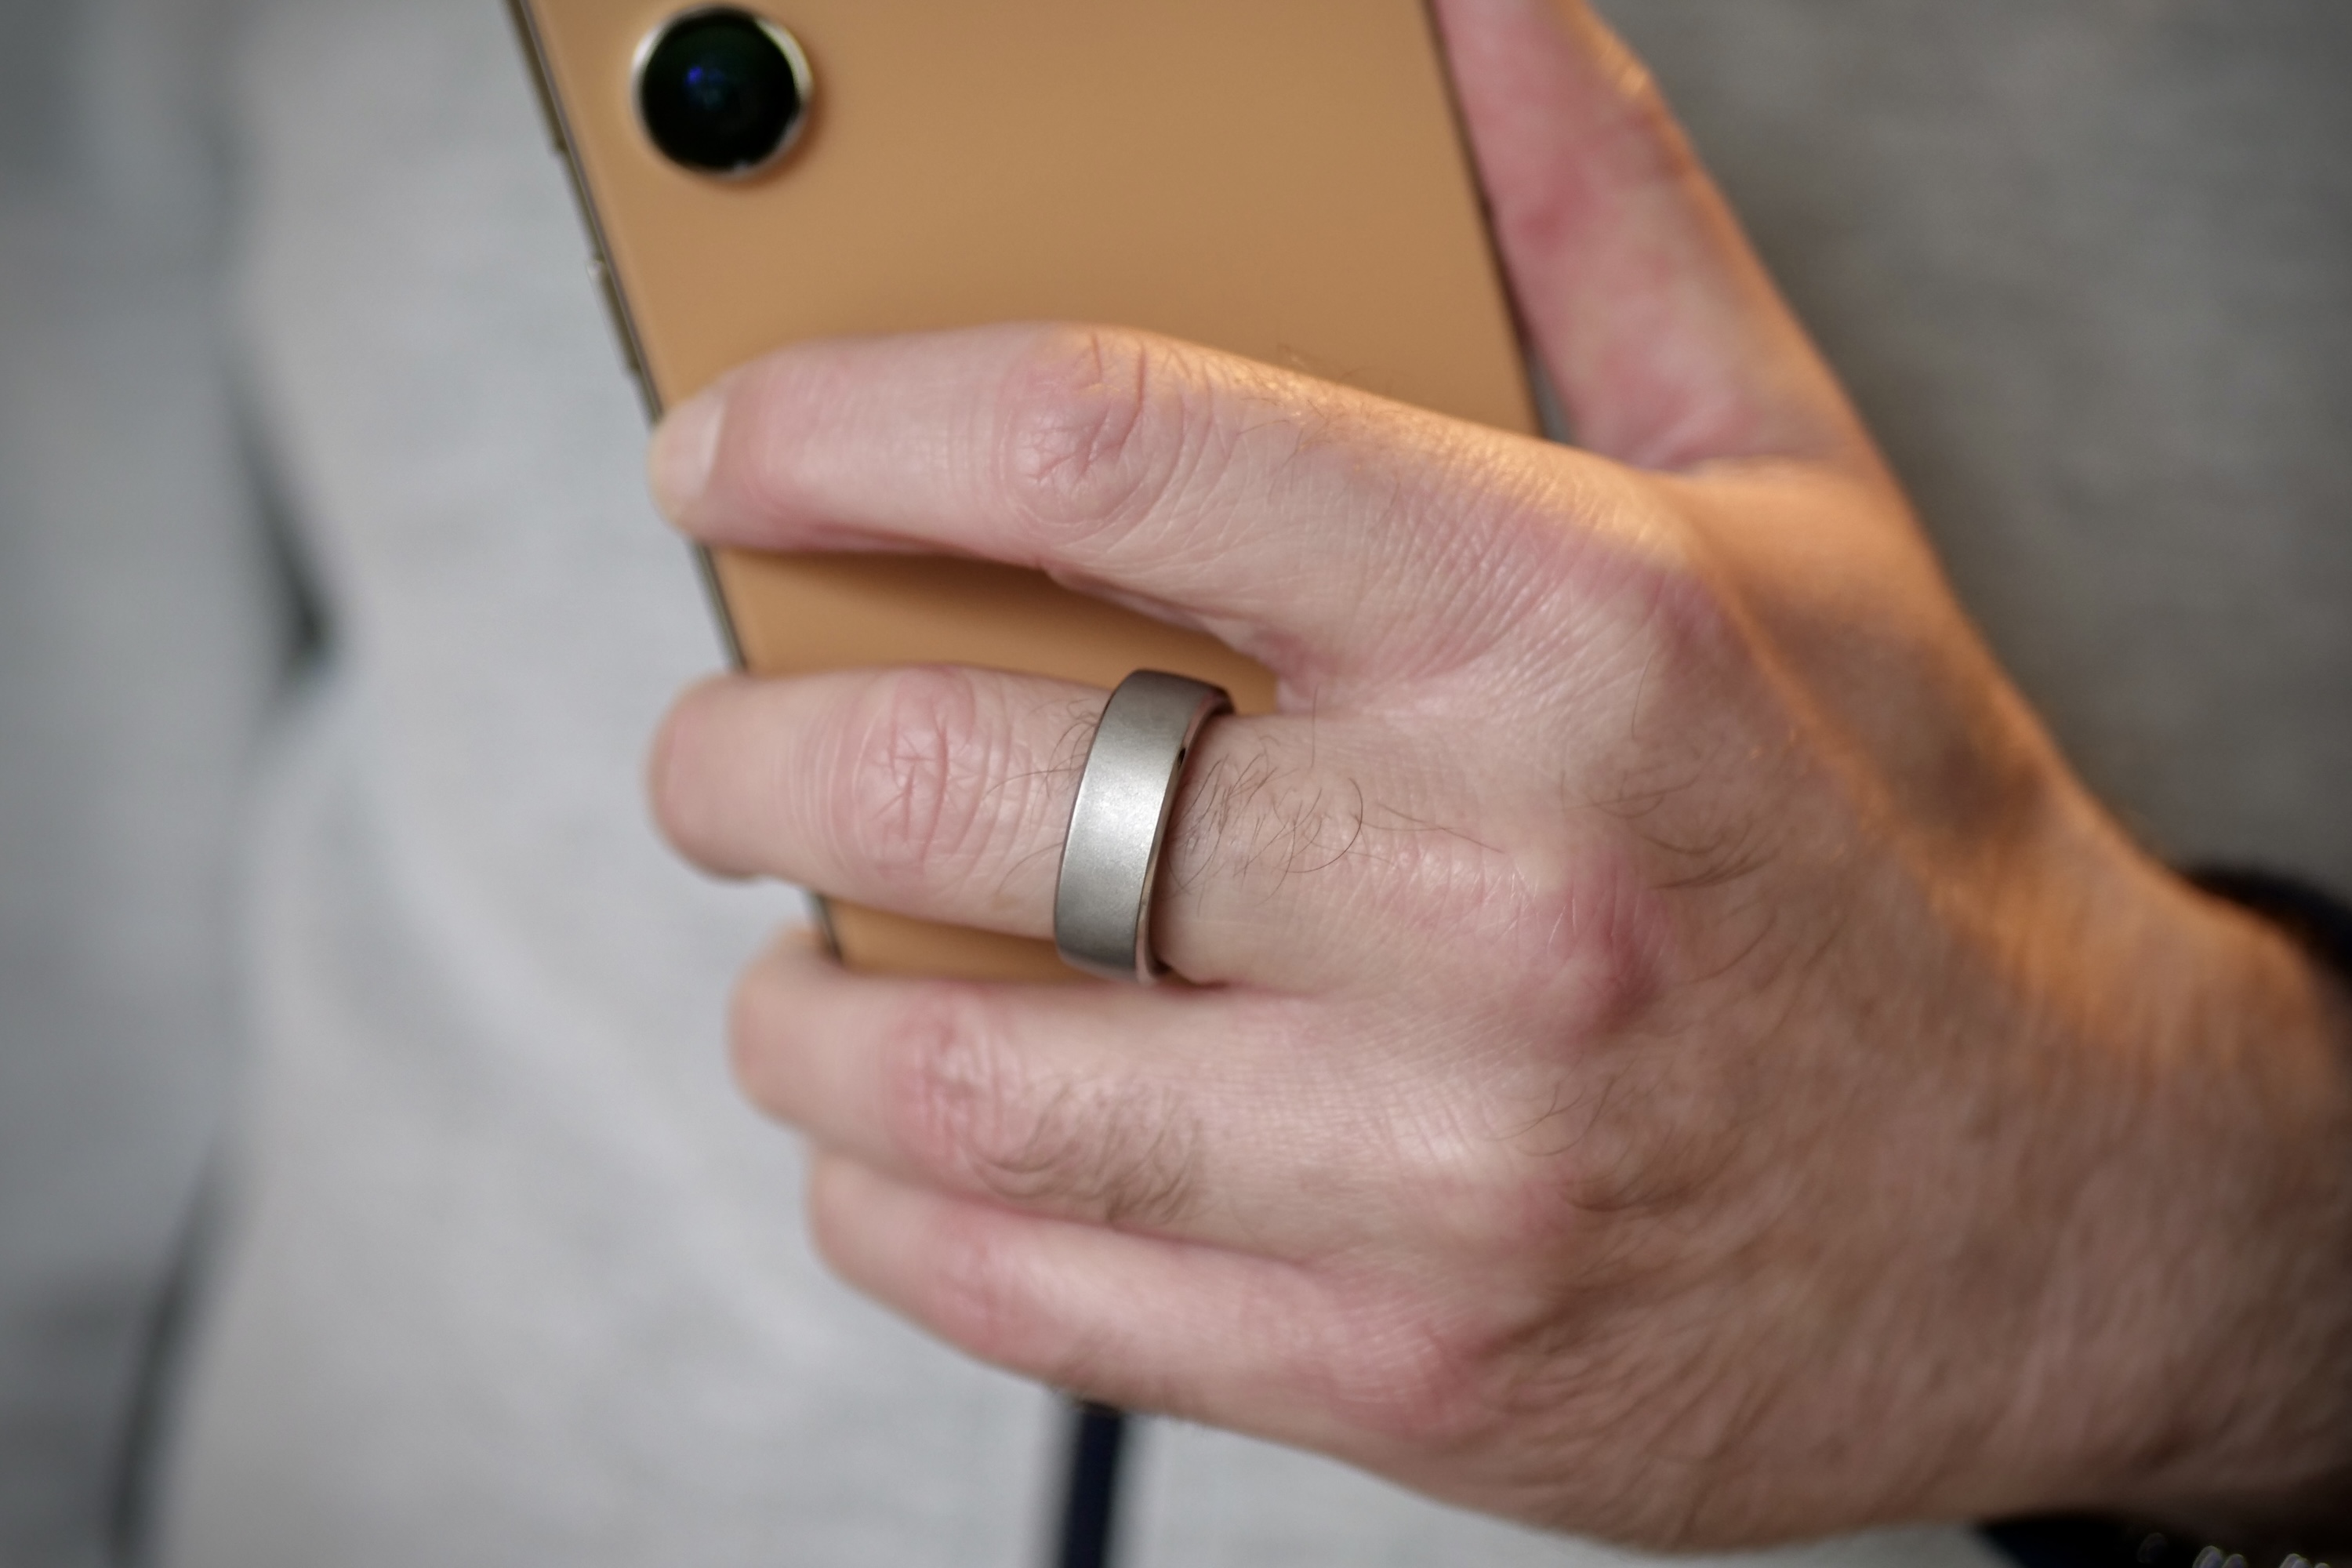 Why I can't wait for Apple to finally make a smart ring | Digital Trends